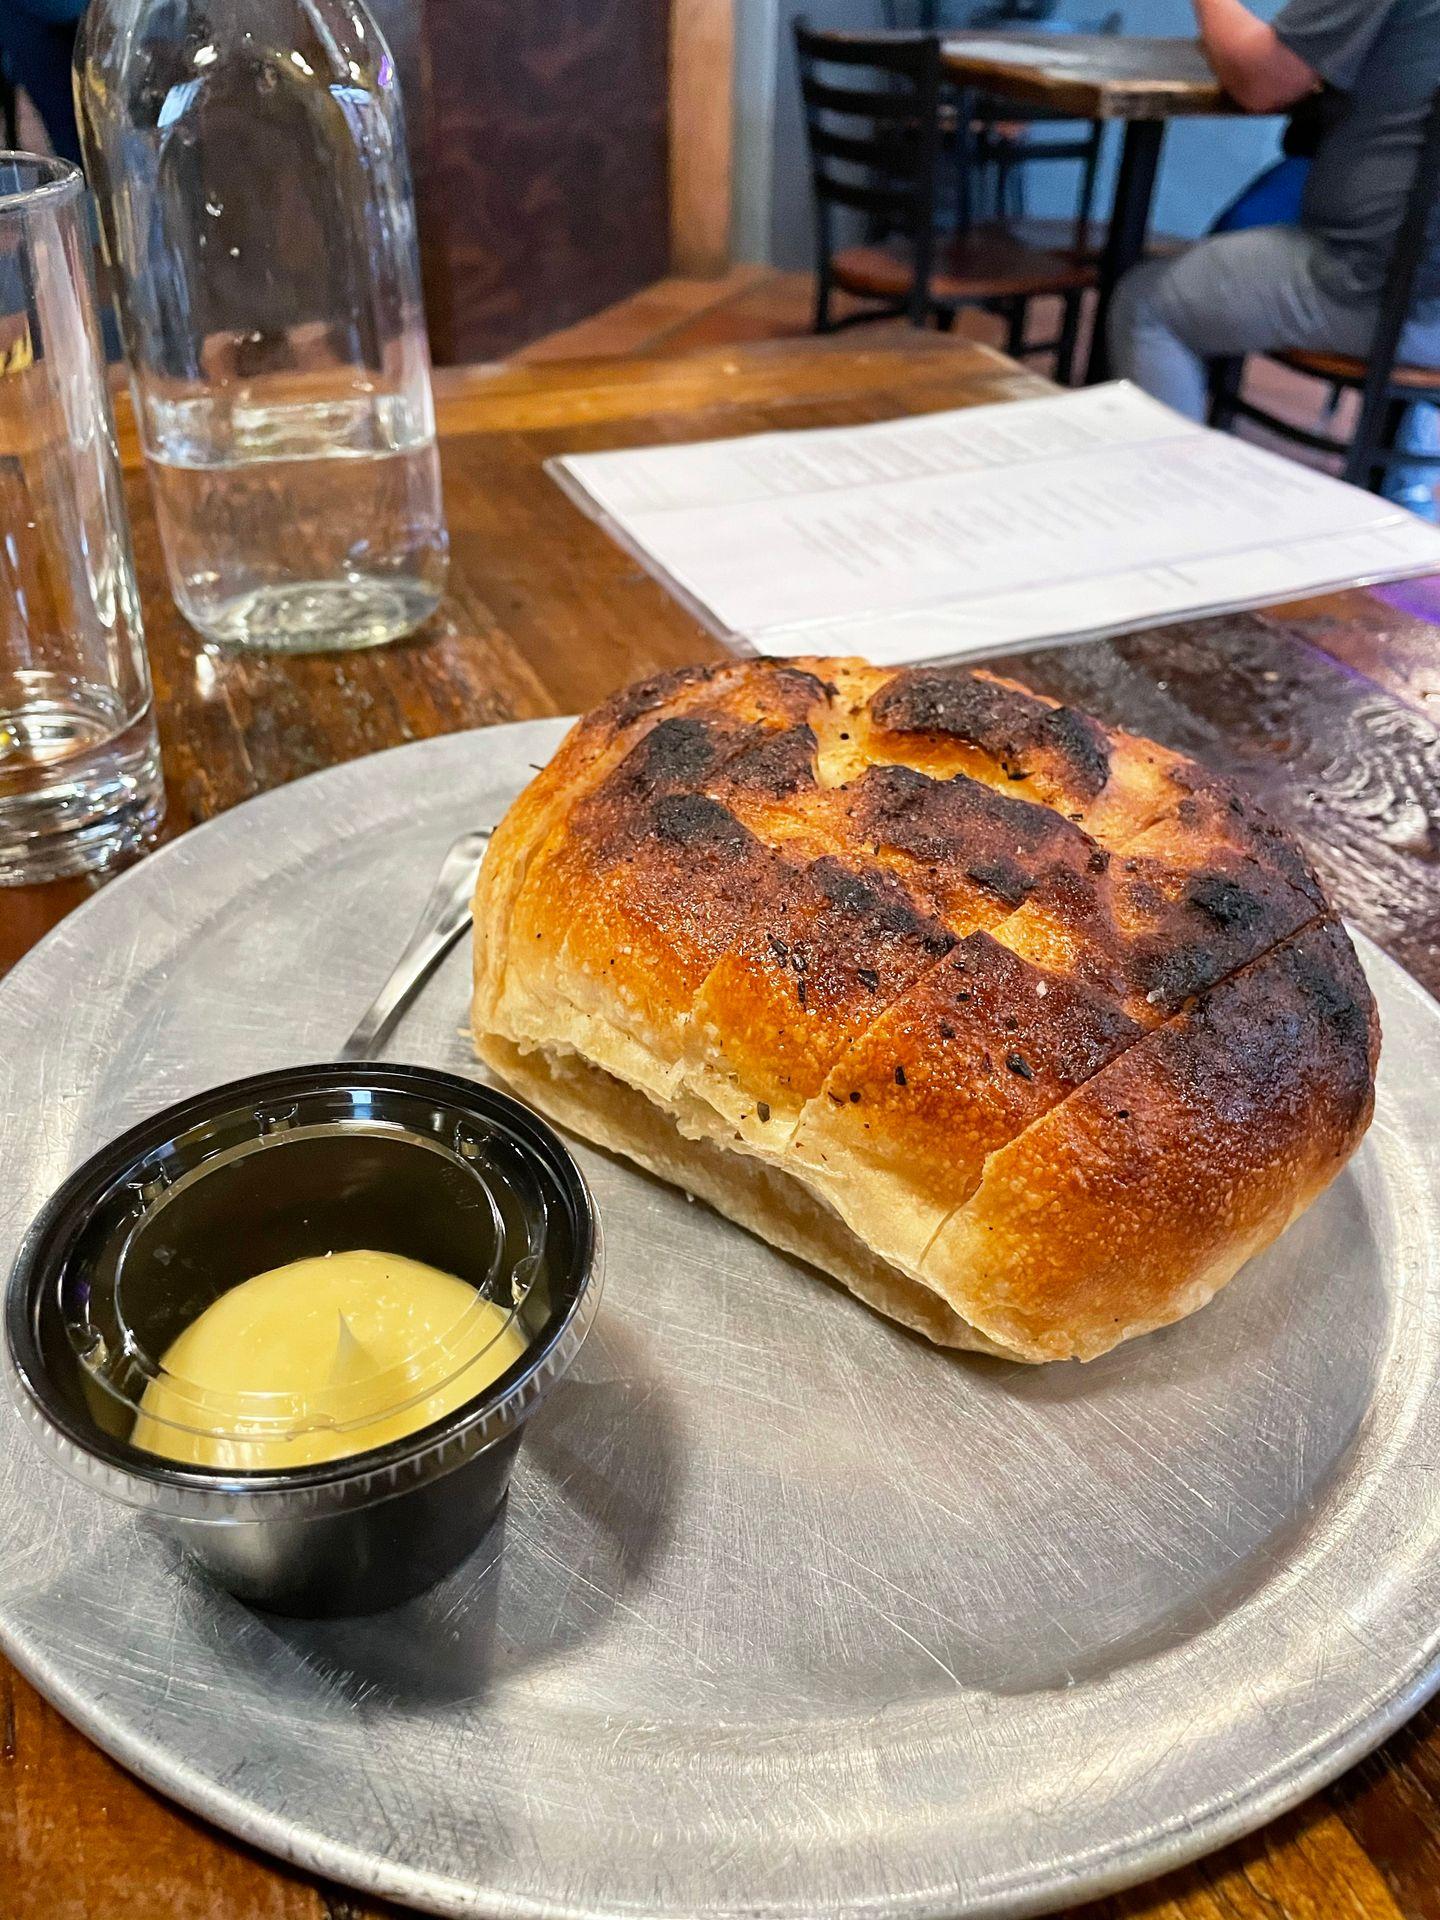 A loaf of bread with whipped butter next to it.